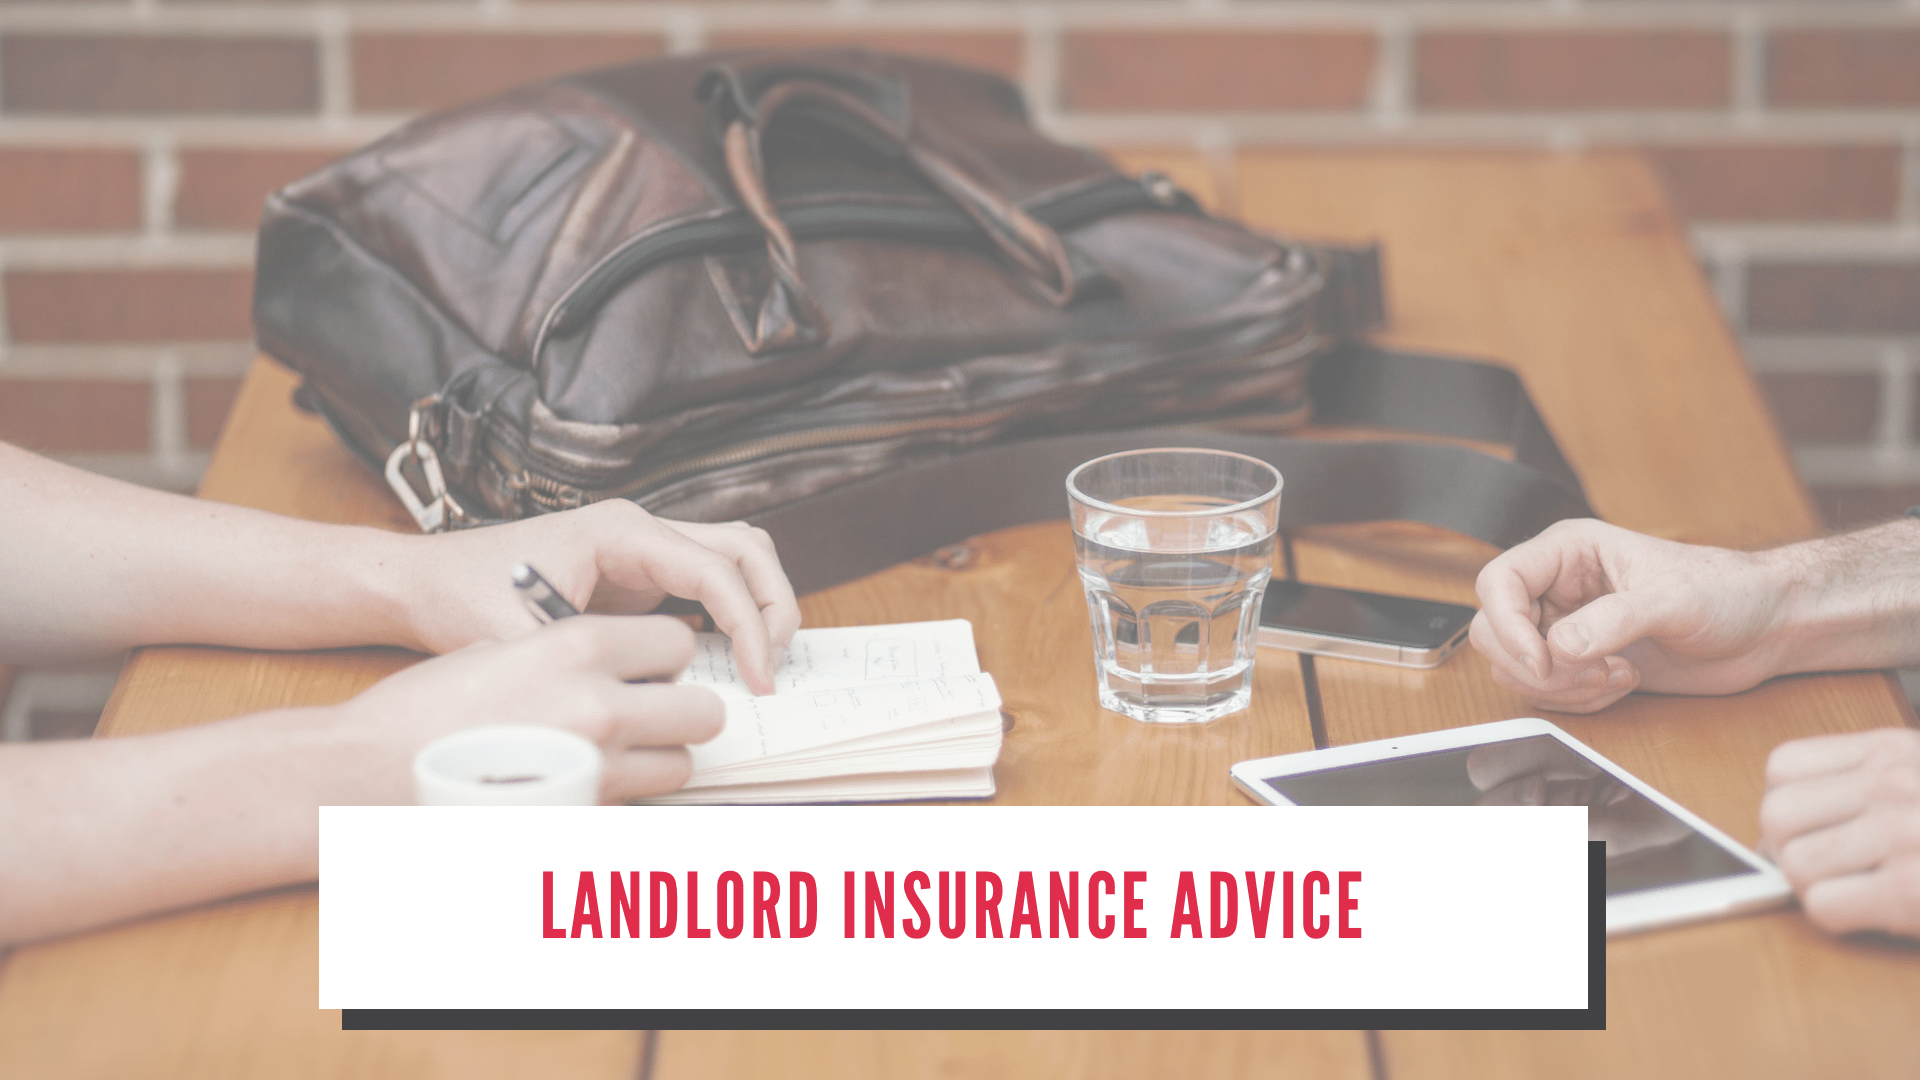 Landlord Insurance Advice for Phoenix Property Owners